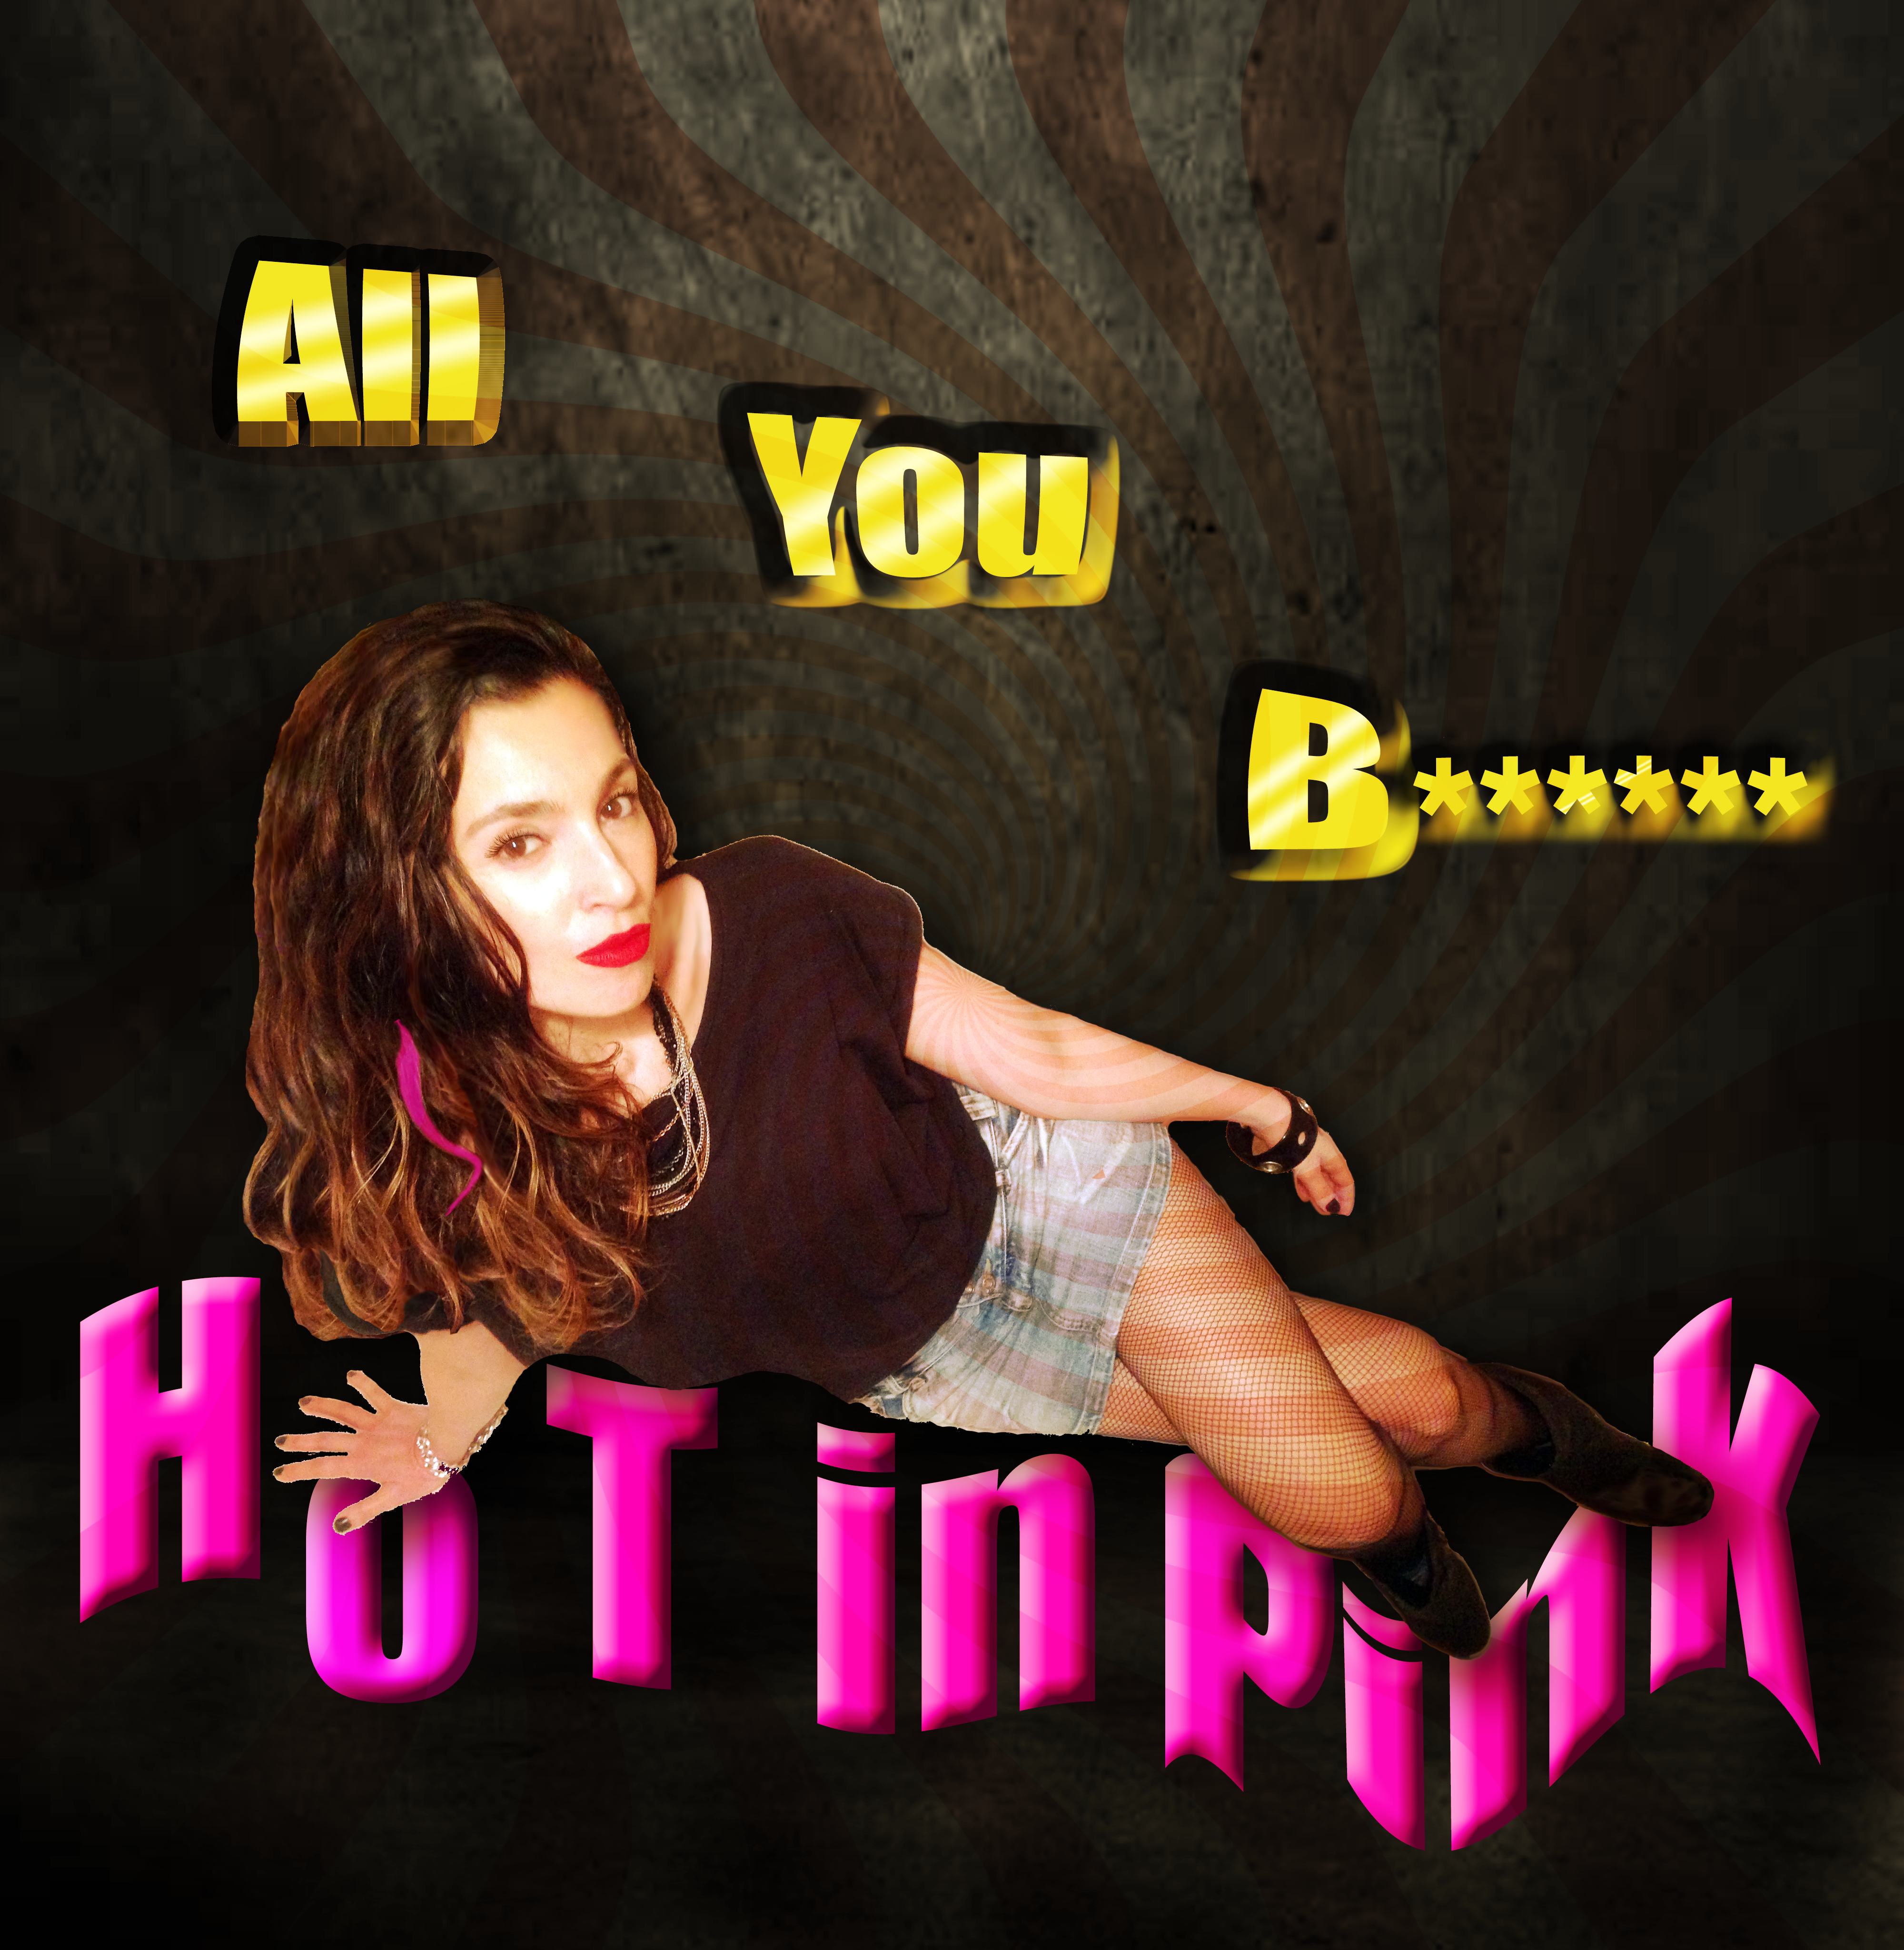 Artwork for the single “All You Bitches” by Hot In Pink